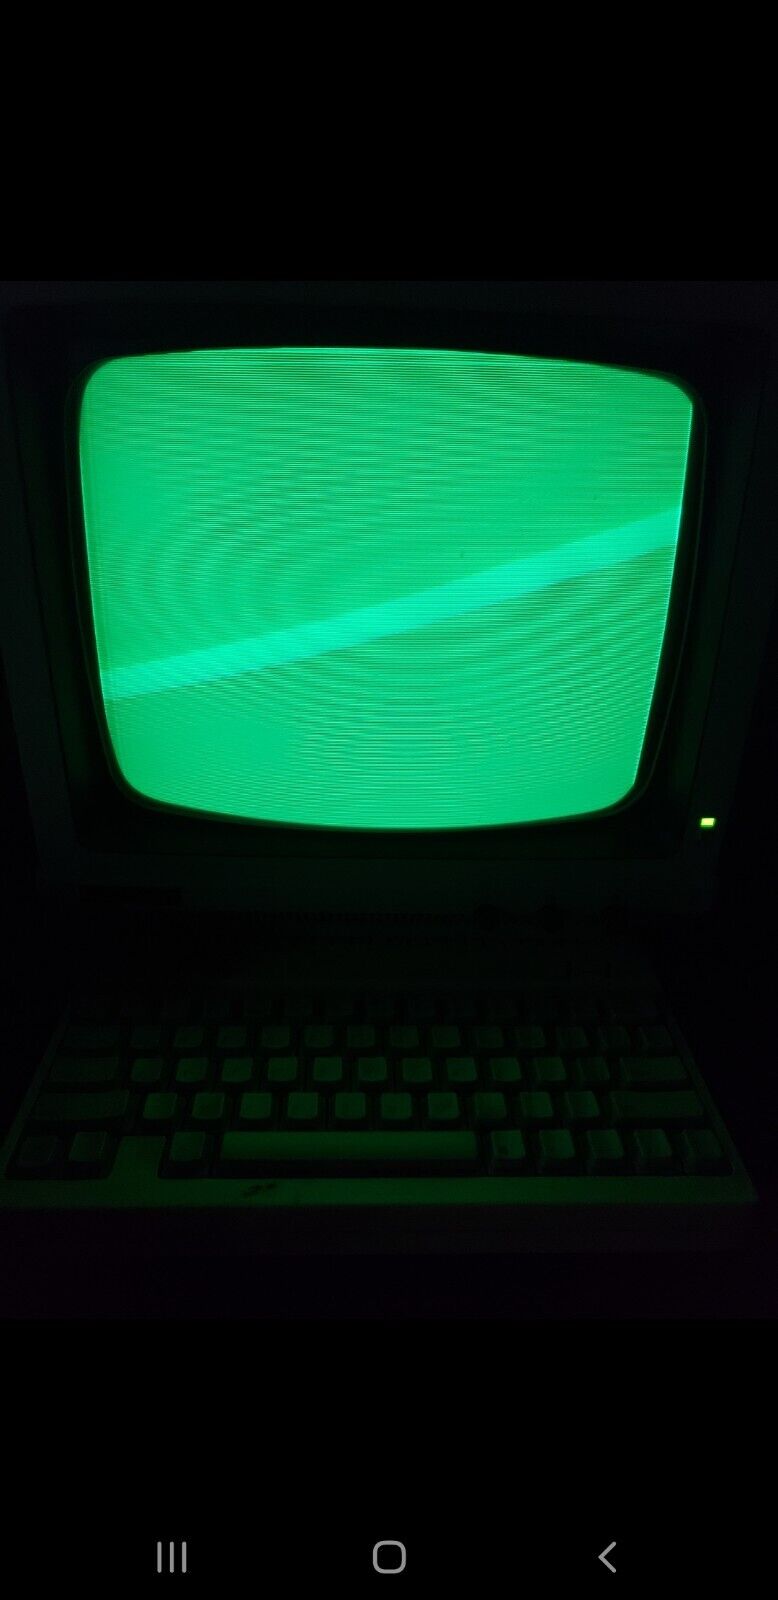 Vintage Apple IIc A2S4000 Computer with A2M4090 Monitor - Boots very nice